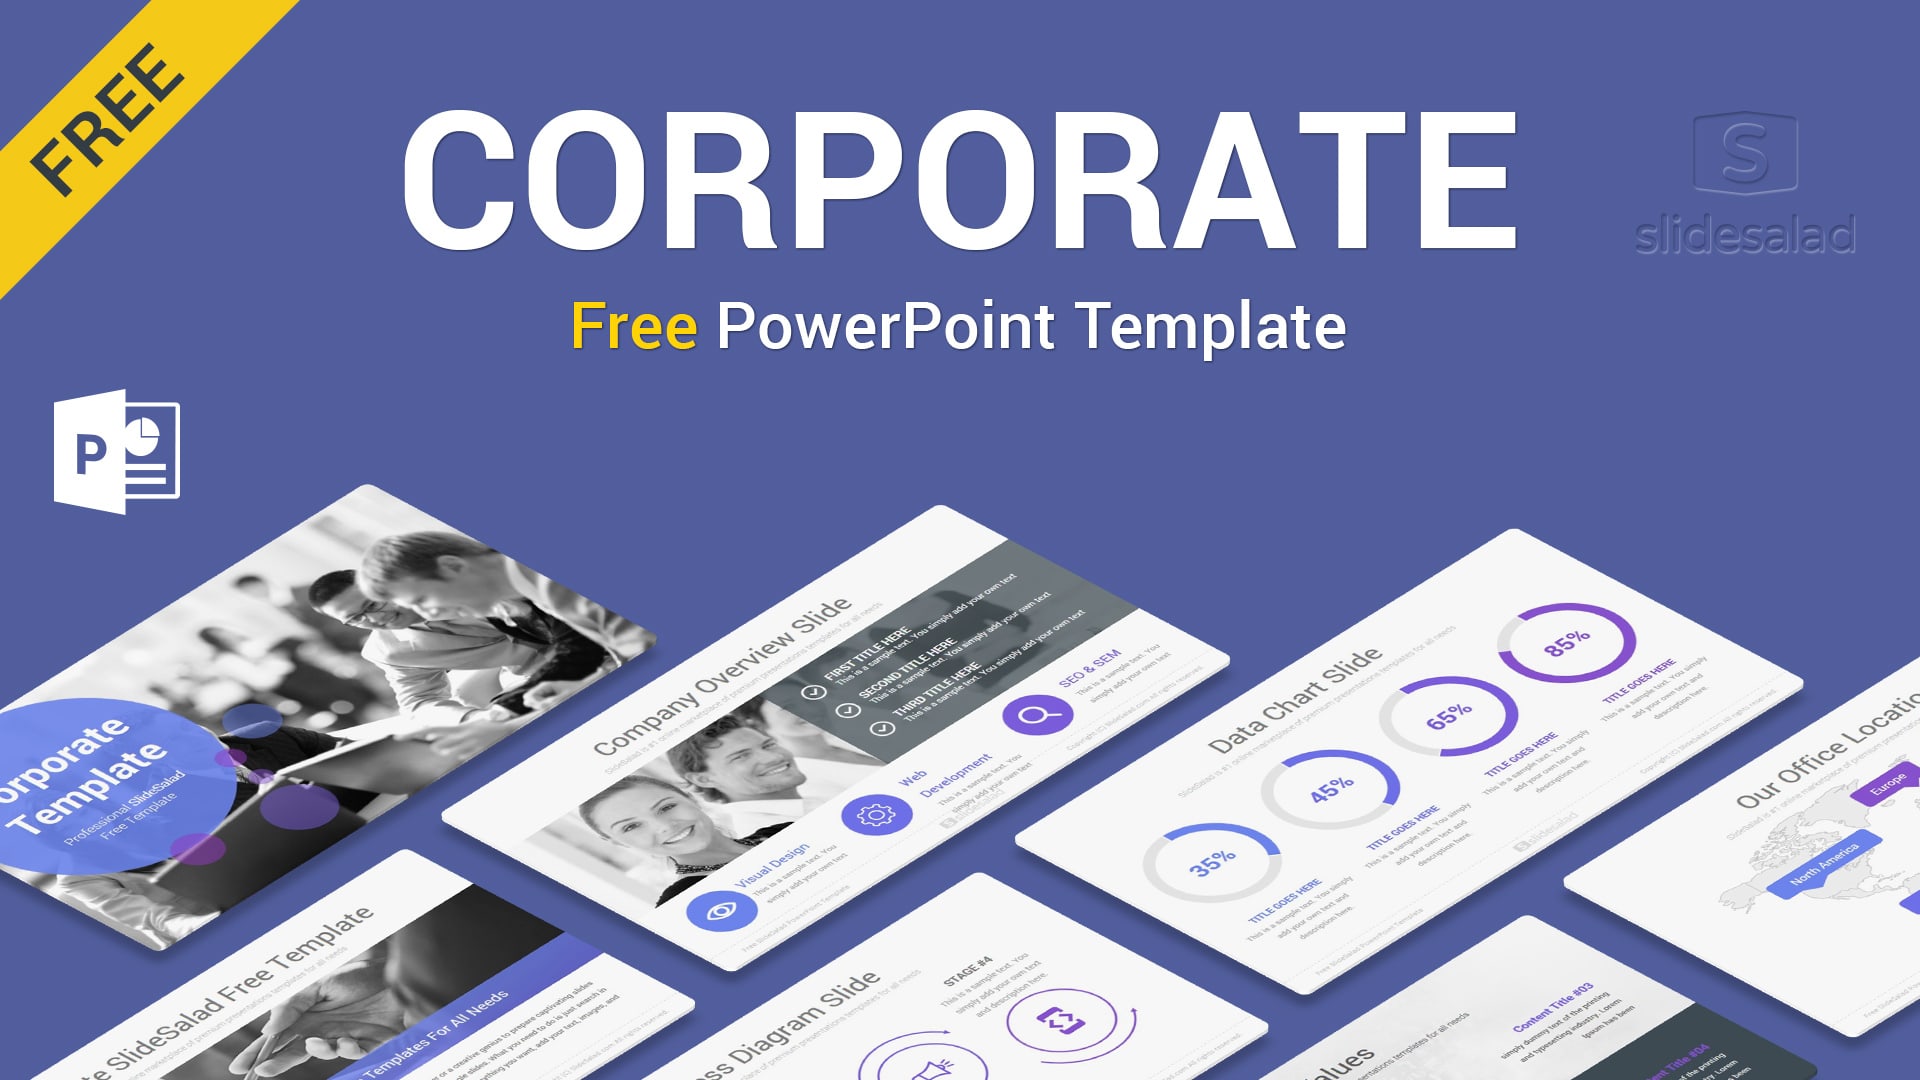 Free Corporate PowerPoint Template PPT Slides